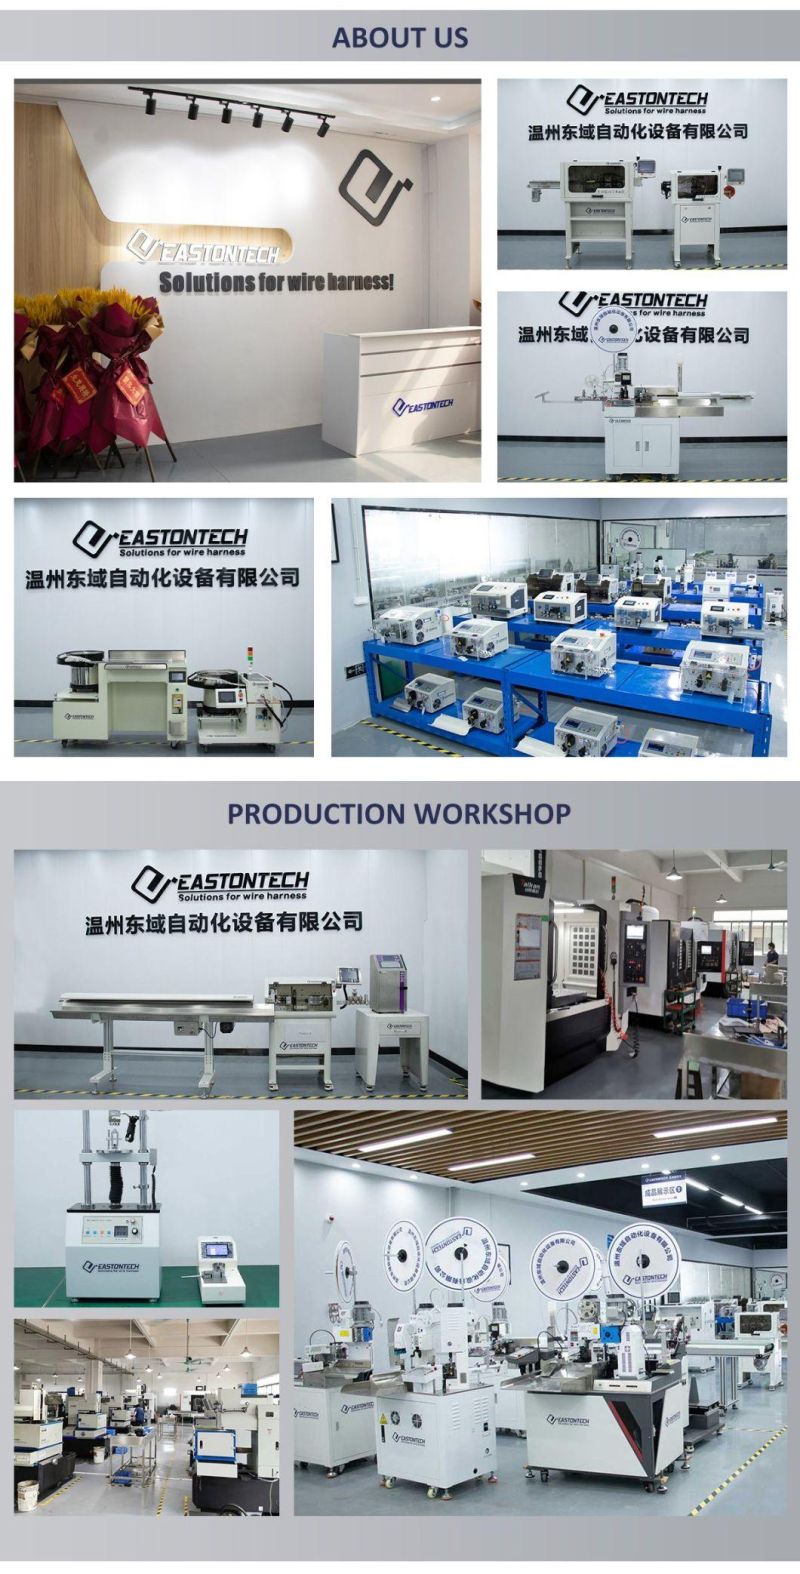 Eastontech Ew-05f Full Auto Wire Cutting and Stripping Machine Multicore Cable Outer Jacket and Inner Cable Stripper